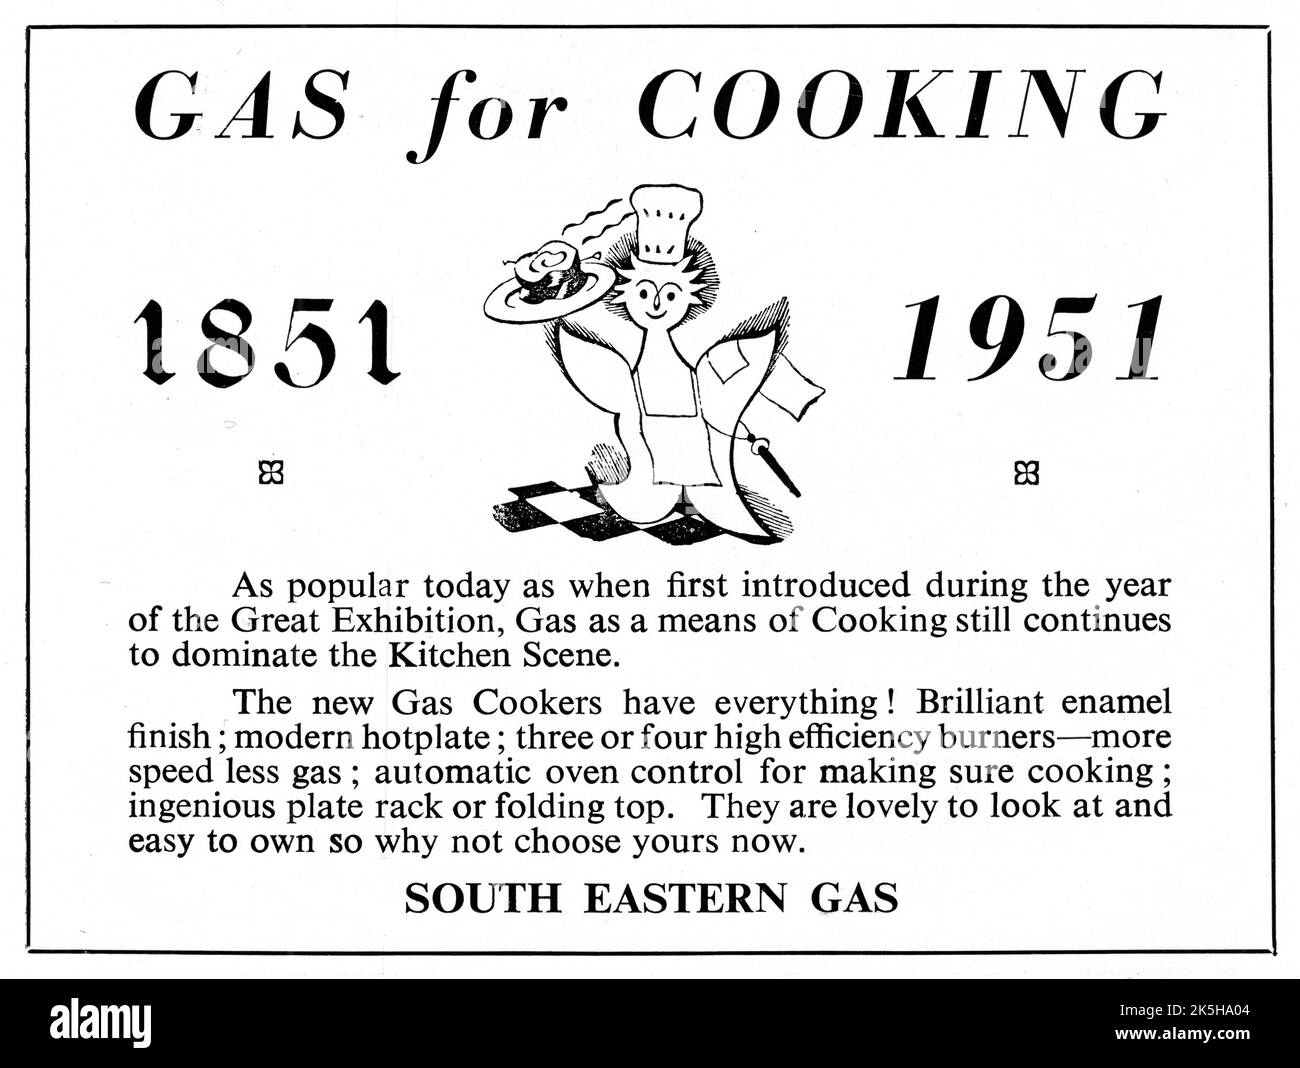 A 1951 advertisement for South Eastern Gas, promoting ‘Gas for Cooking’ and the purchase of new gas cookers. “1851 -1951 – As popular today as when first introduced during the Great Exhibition, Gas as a means of Cooking still continues to dominate the Kitchen Scene”.  The advert incorporates the cartoon character, ‘Mr Therm’, originally created in 1933 by graphic designer and illustrator Eric Fraser for the Gas Light & Coke Company. Stock Photo